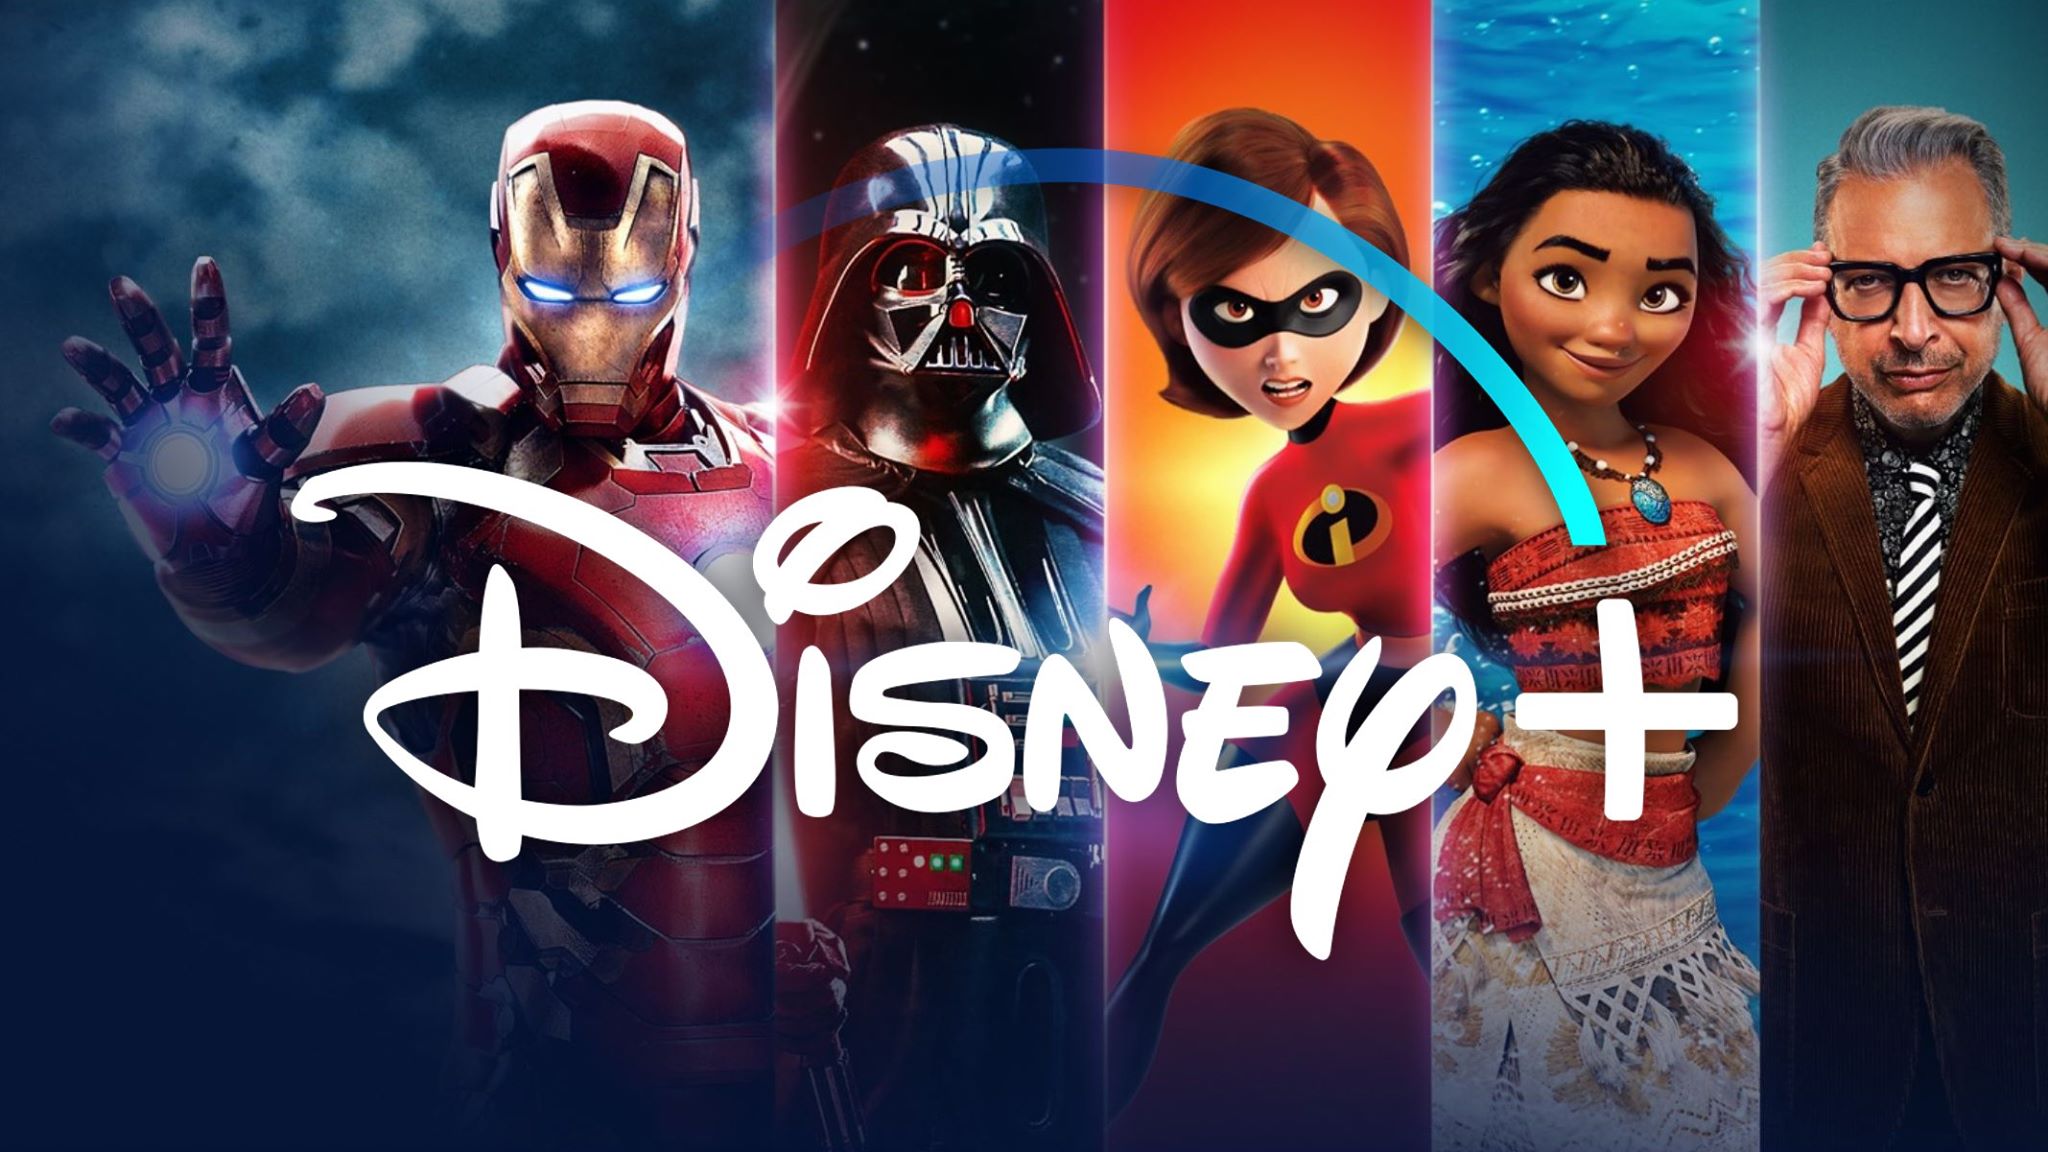 Disney Plus Now Streaming to Over 54 Million Members